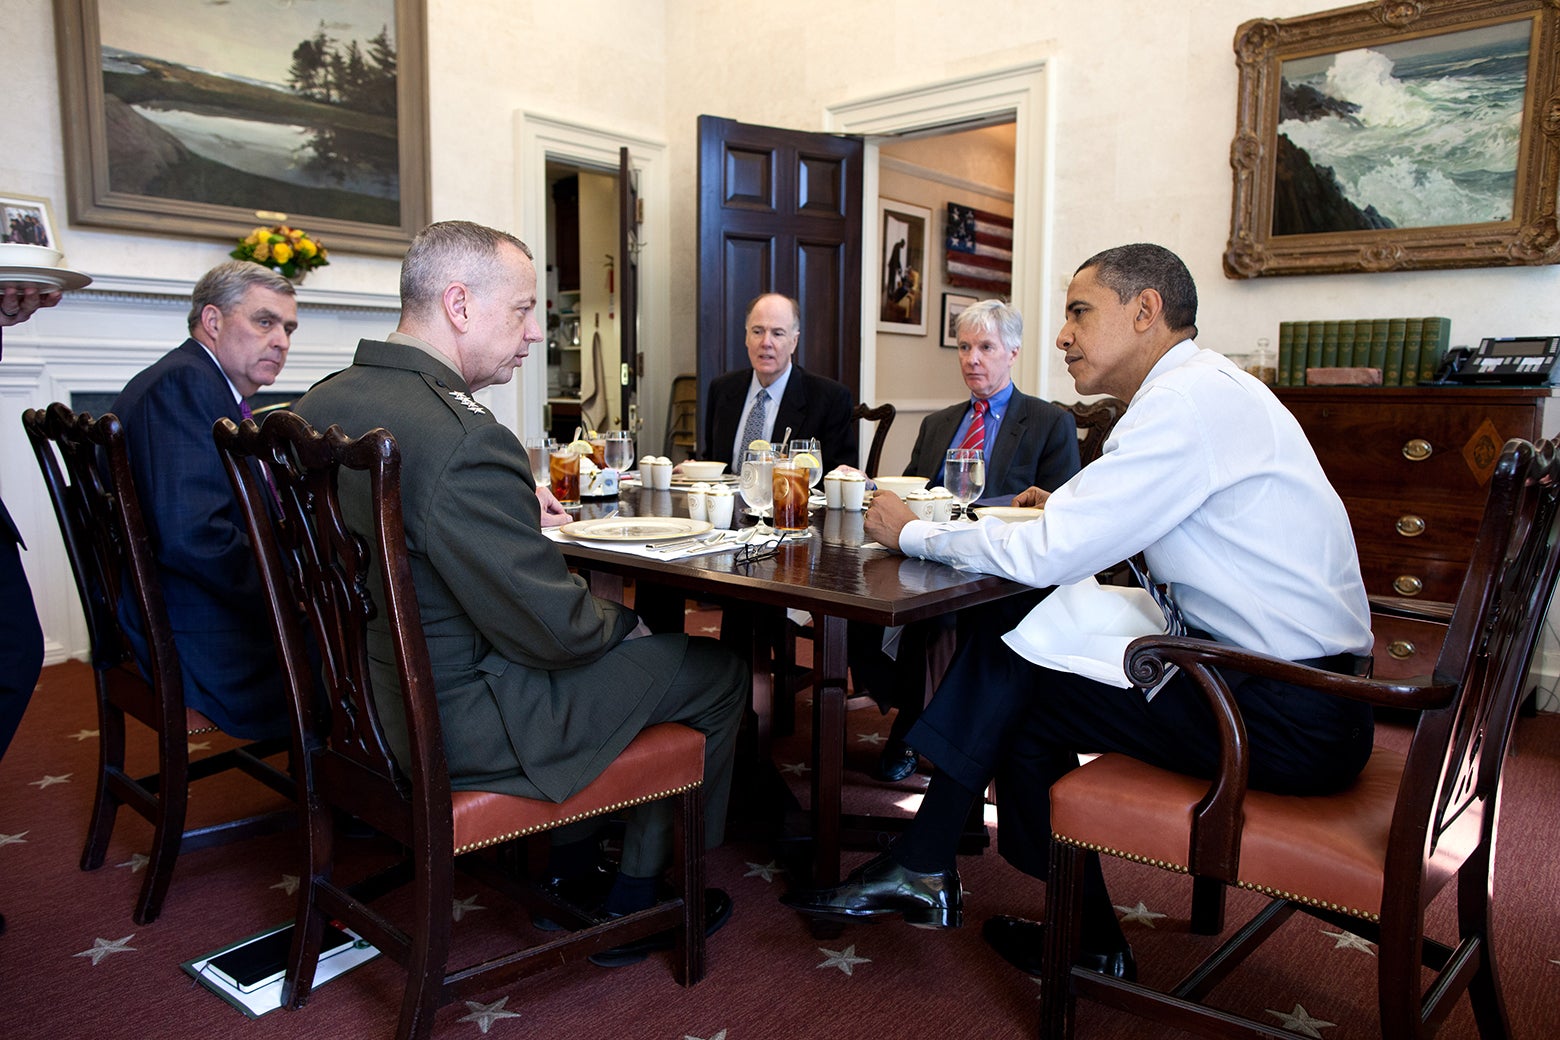 President Obama meeting with advisors in the Presidential Dining Room.